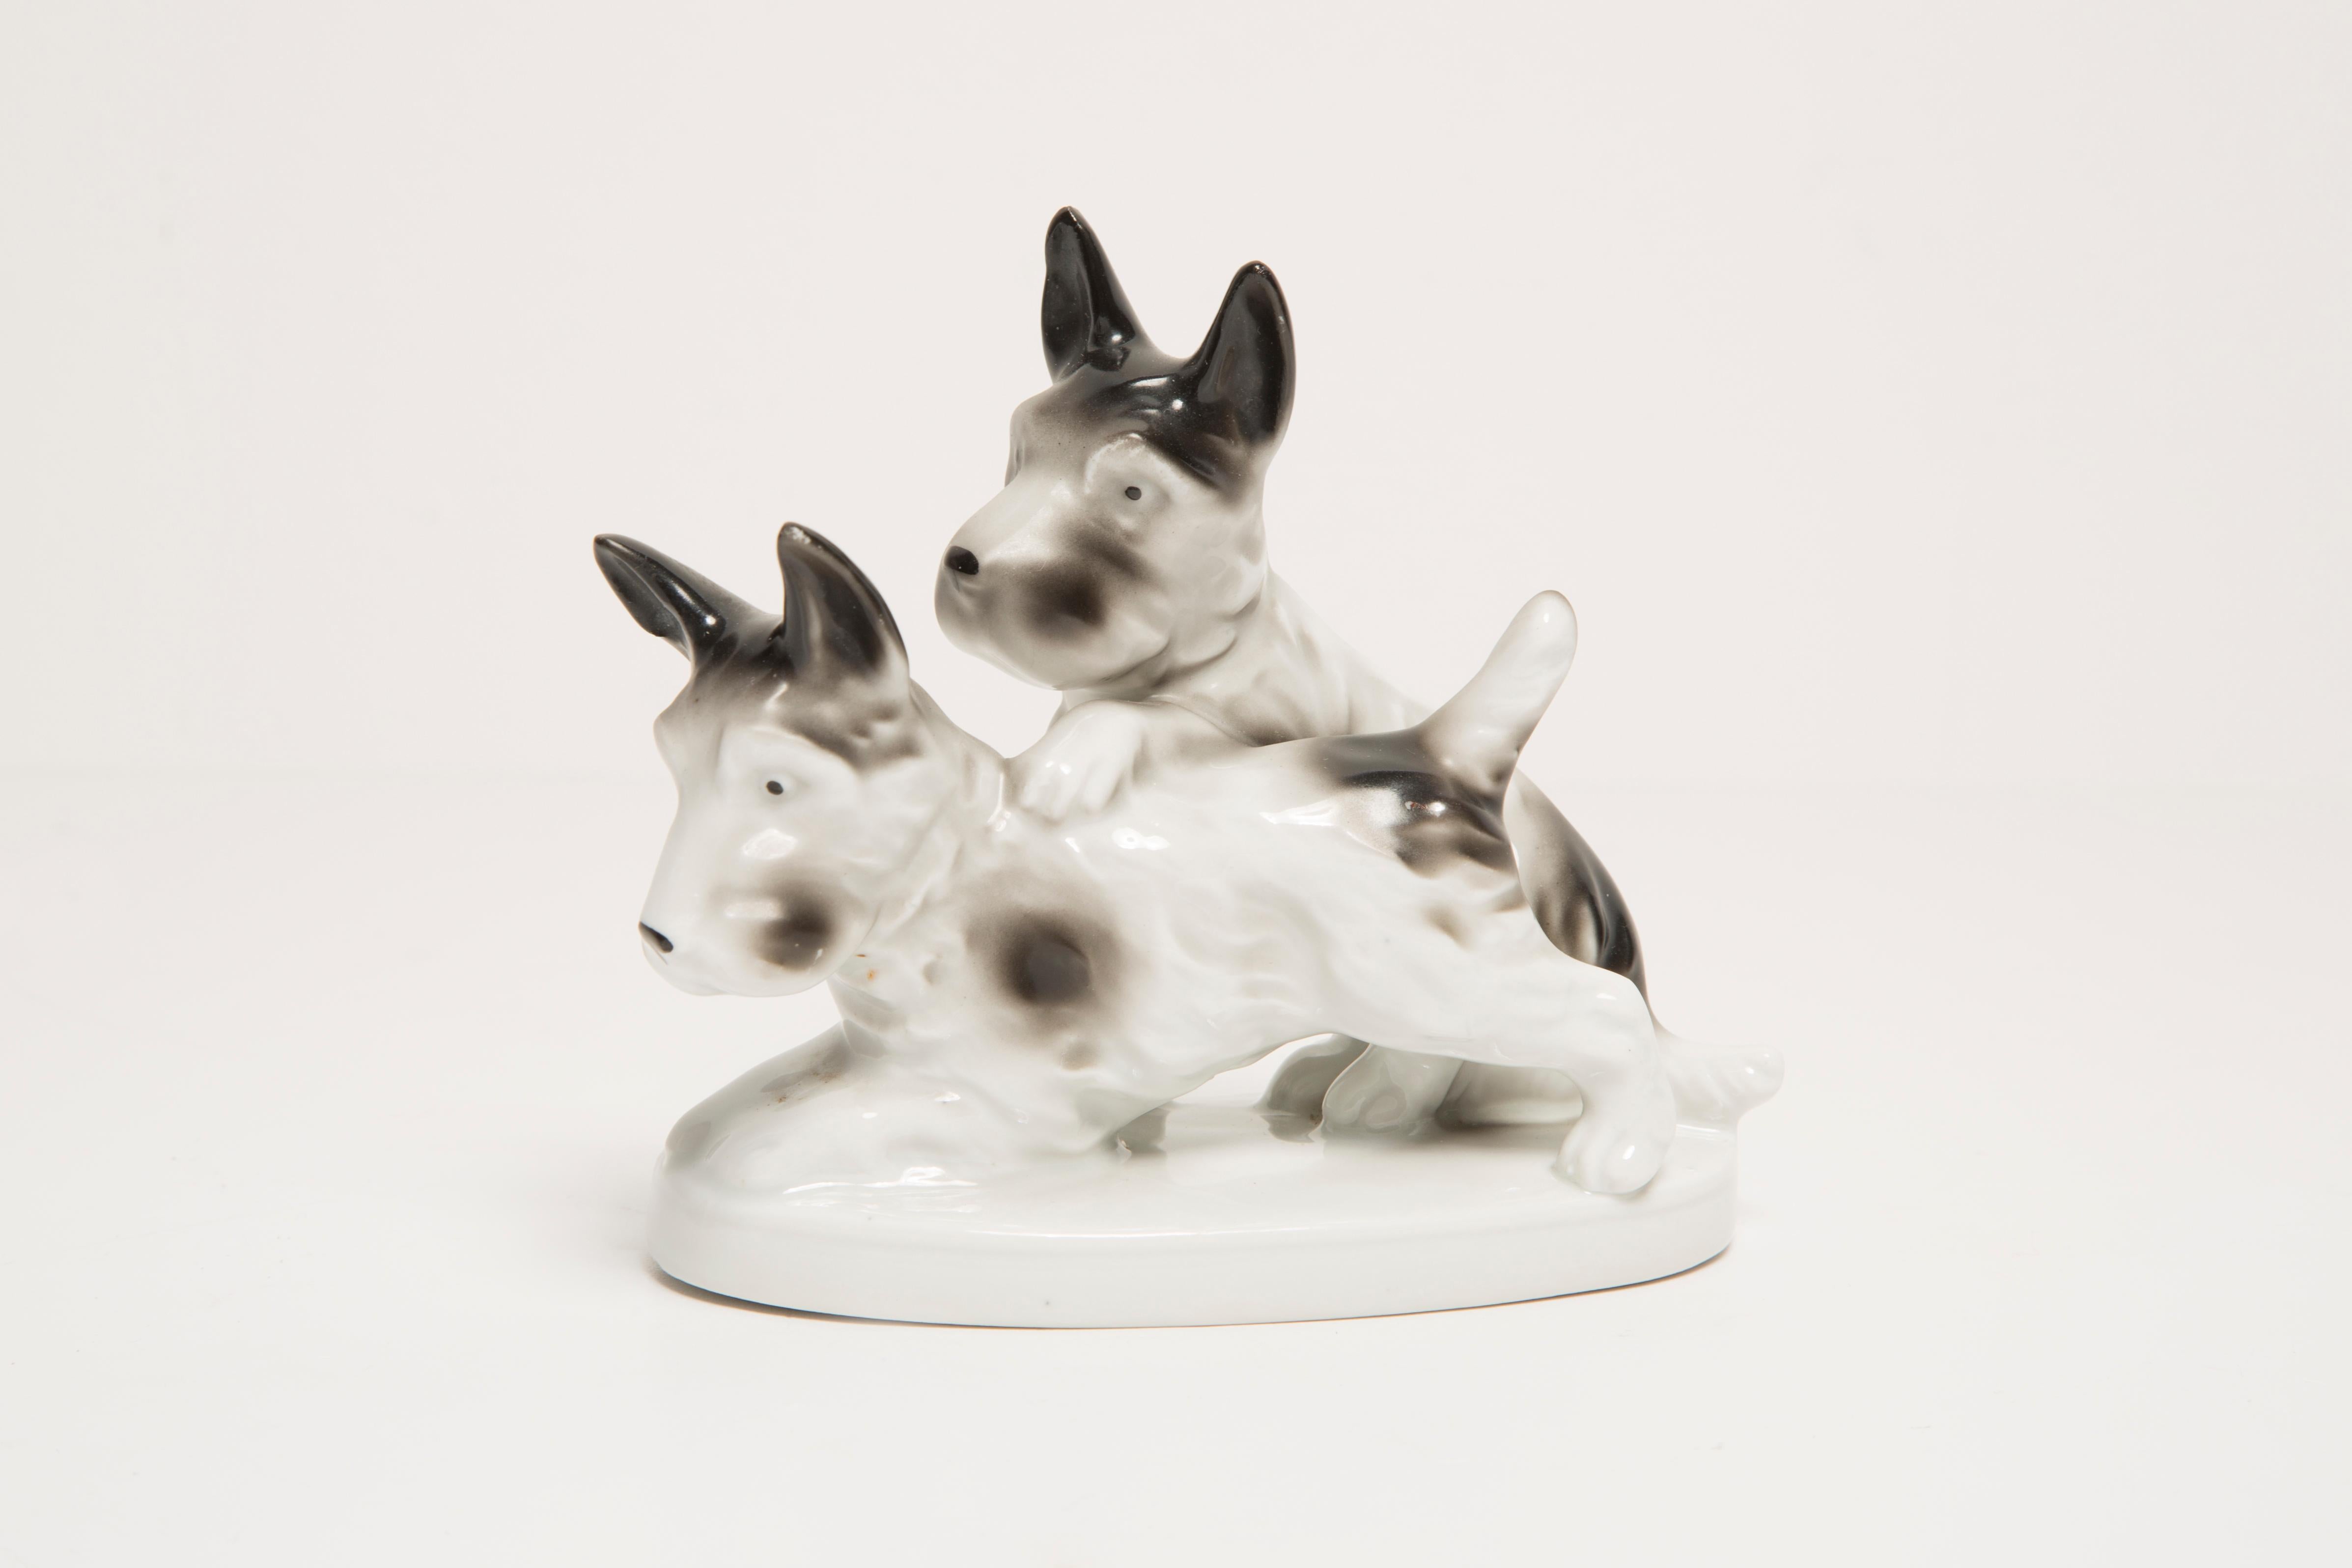 Painted ceramic, very good original vintage condition. No damages or cracks. Beautiful and unique decorative sculpture. Small Dogs Sculpture was produced in Italy. Only one item available.